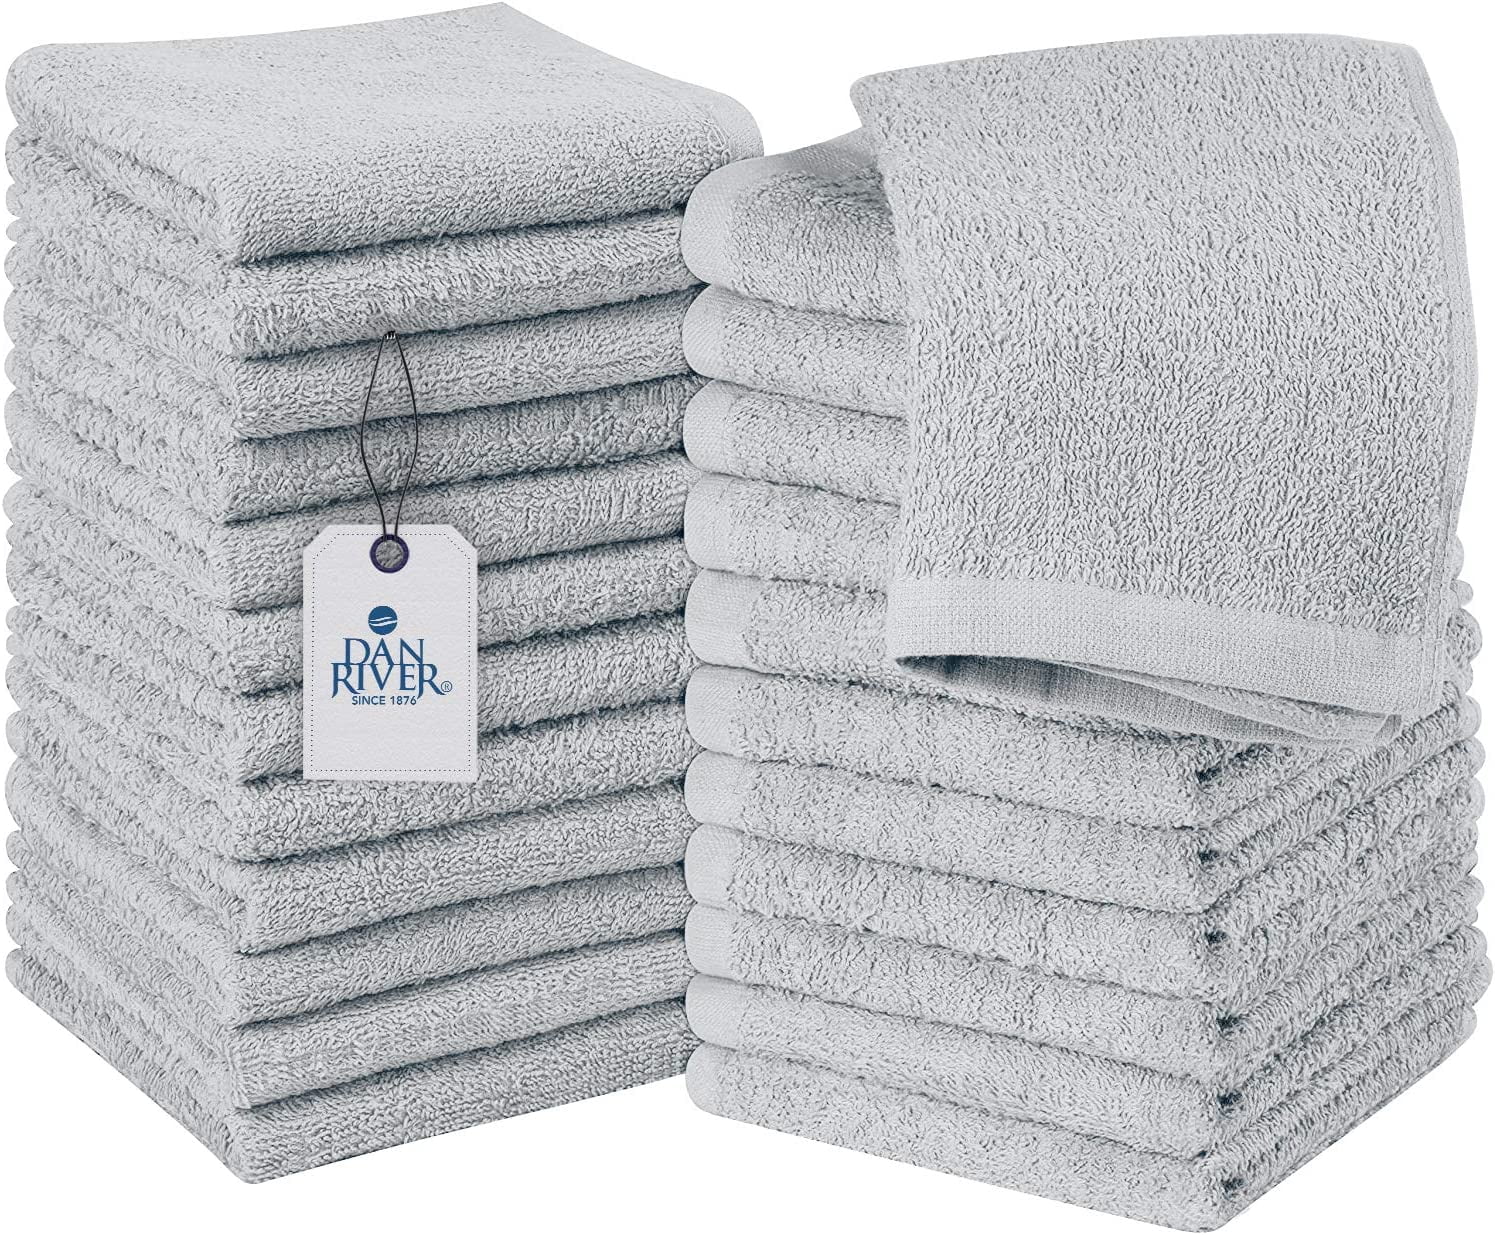  DAN RIVER 100% Cotton Luxury Oversized Bath Towel 40”x80” Clearance  Pack of 1 – 600 GSM Highly Absorbent & Quick Dry Extra-Large Bath Sheet for  Hotel, Spa, Beach, Pool, Gym in